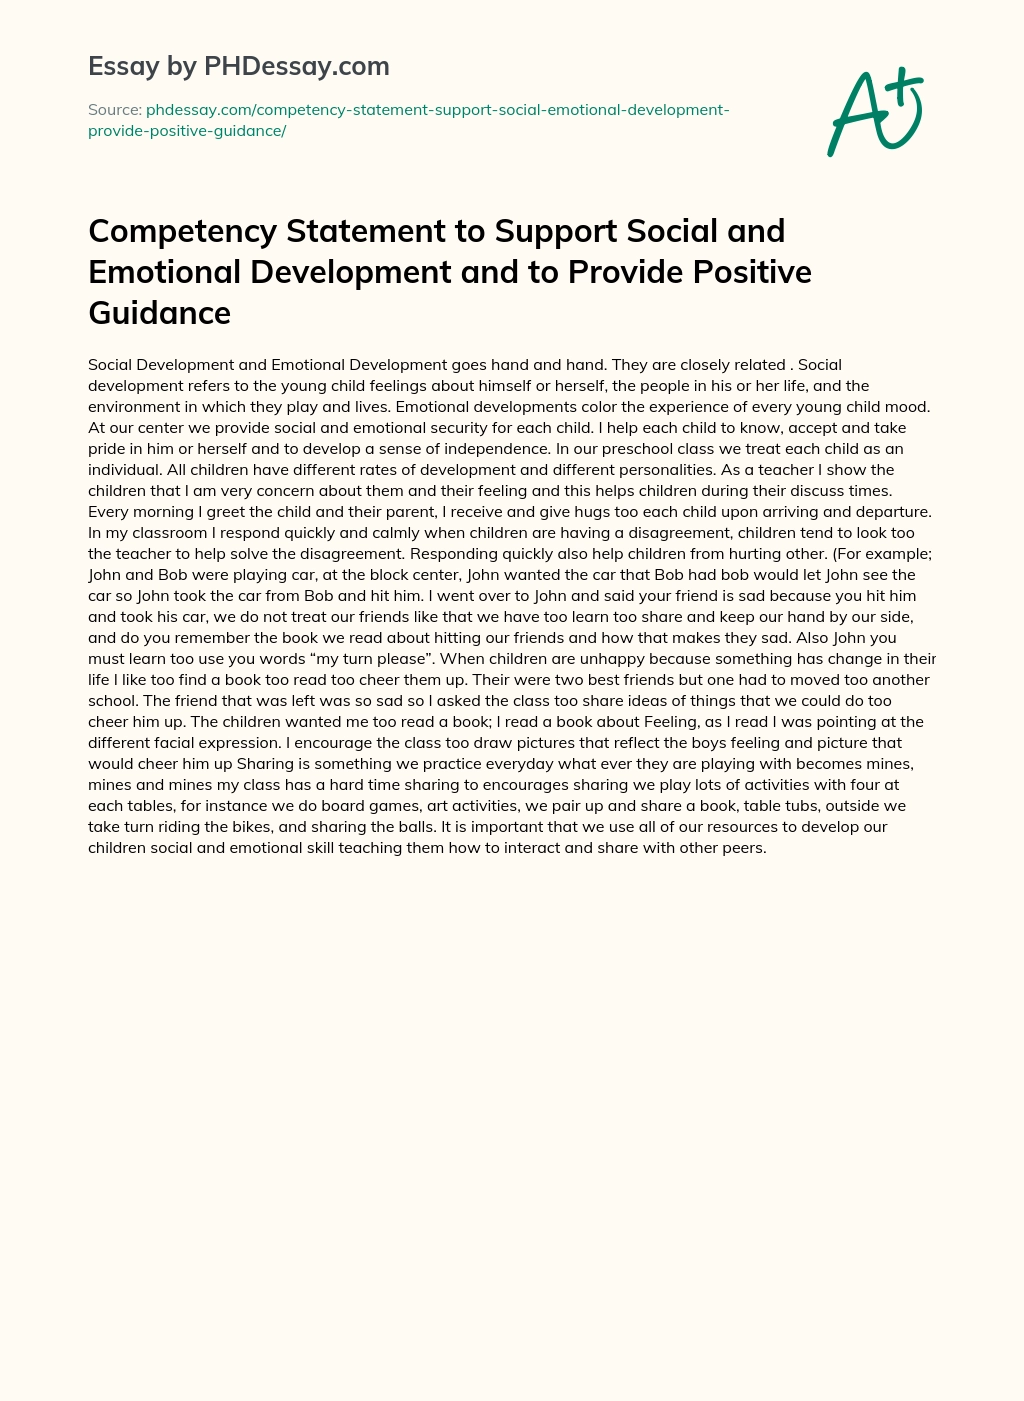 Competency Statement to Support Social and Emotional Development and to Provide Positive Guidance essay